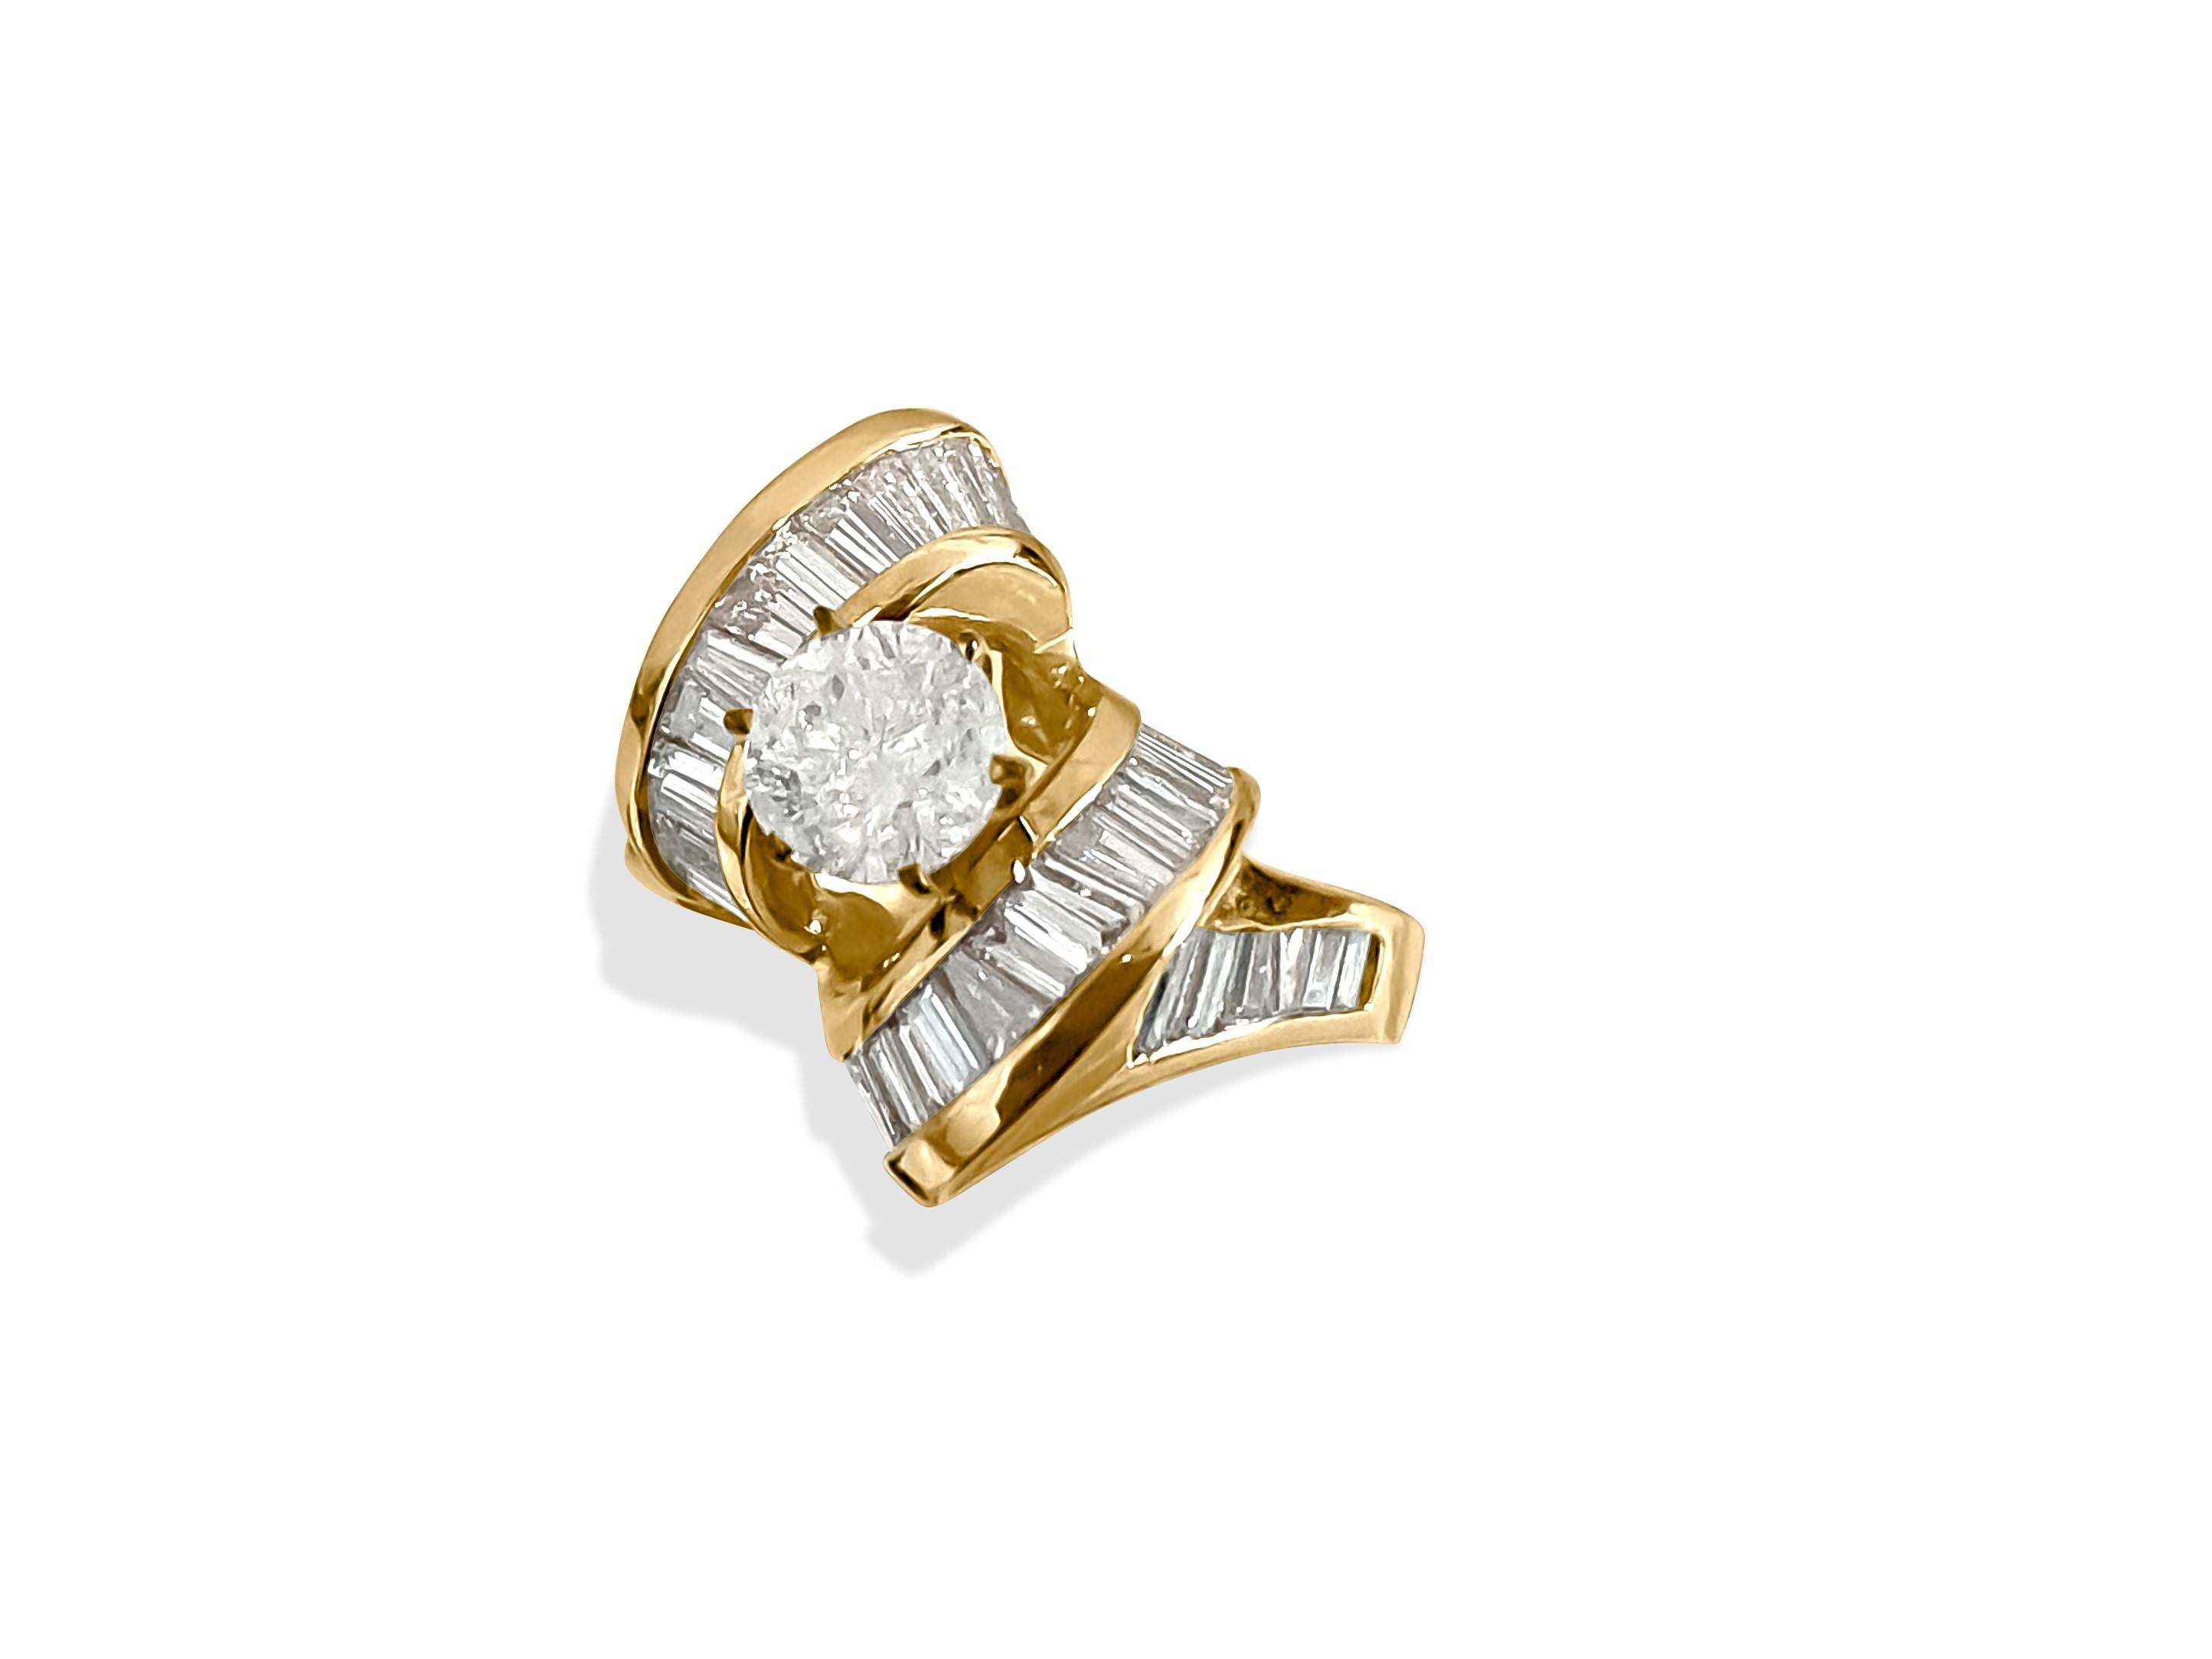 Art Deco 3.00 Carat Diamond Engagement Ring 14K Gold In Excellent Condition For Sale In Miami, FL